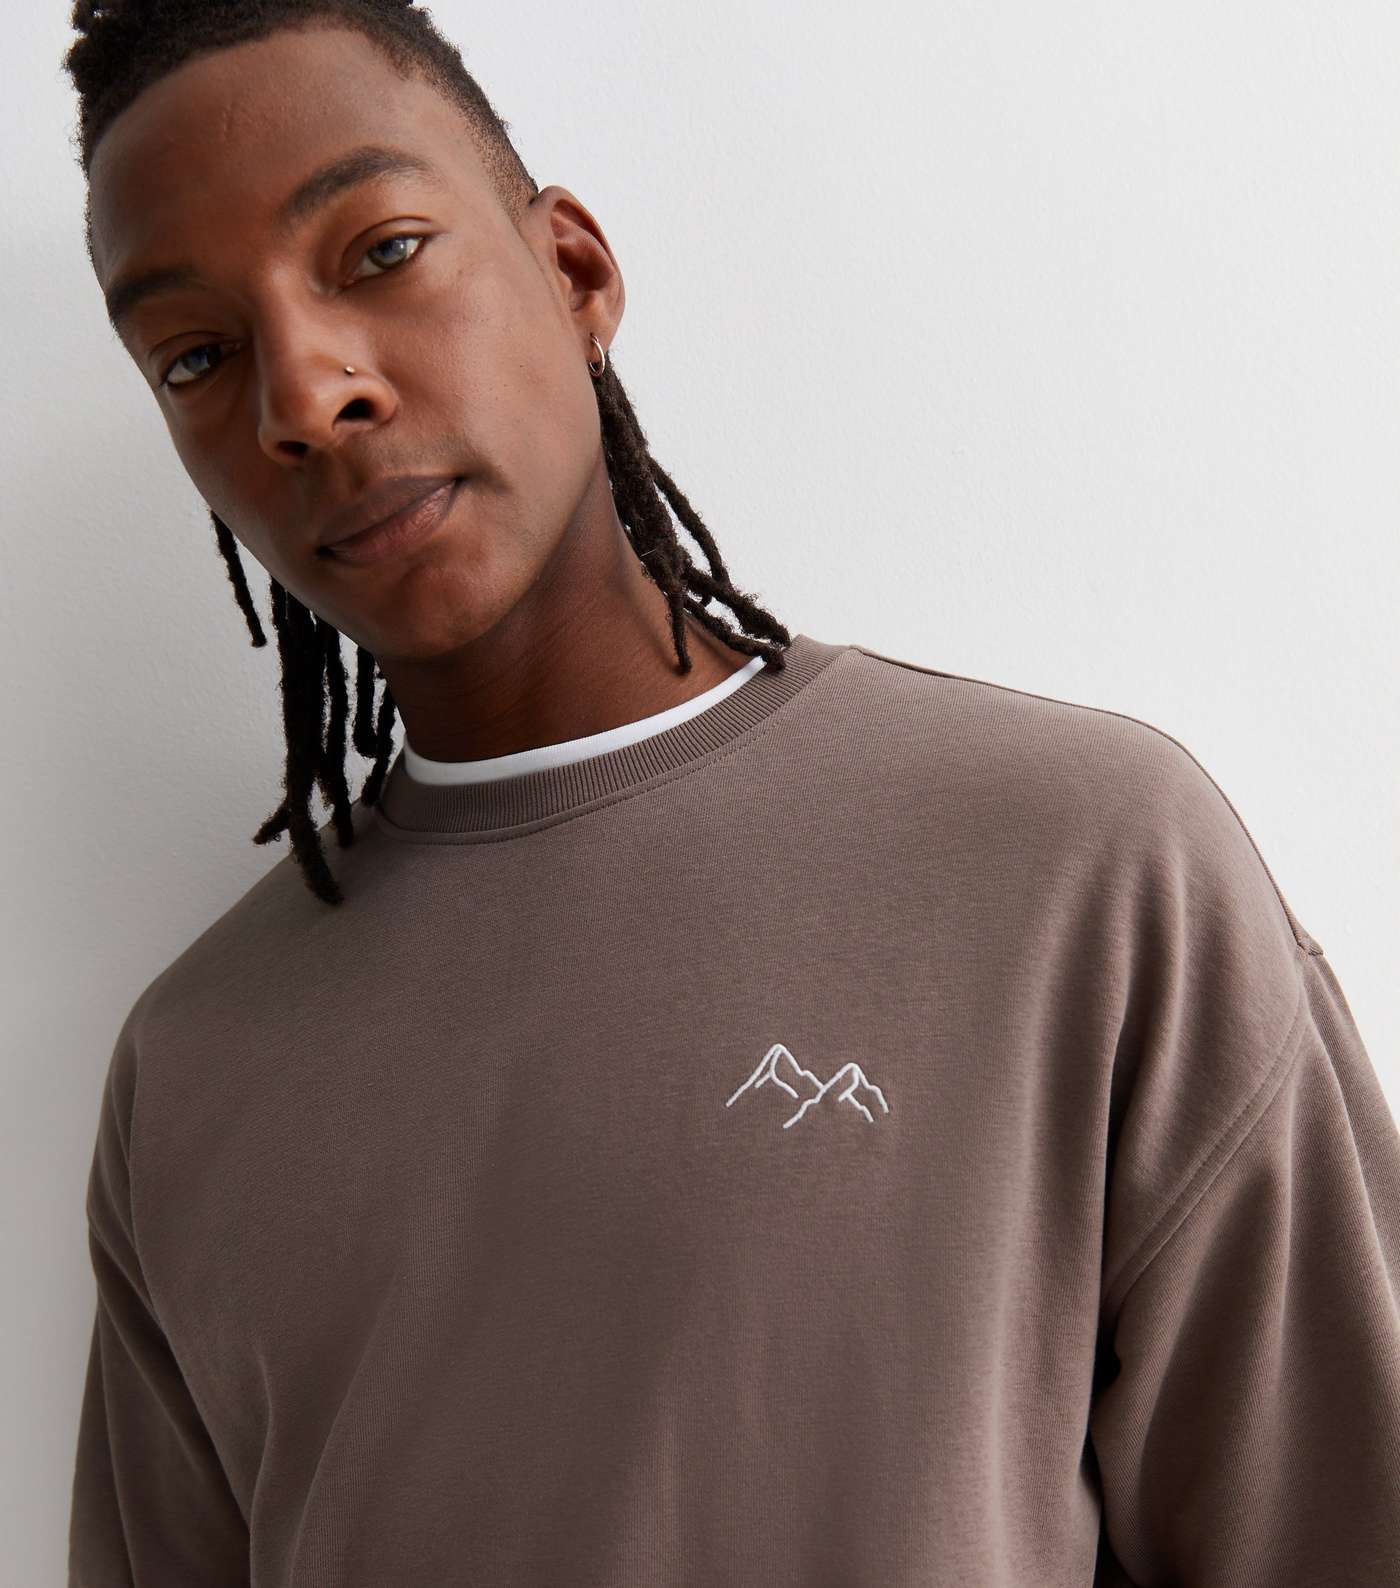 Mink Mountain Embroidered Crew Neck Relaxed Fit Sweatshirt